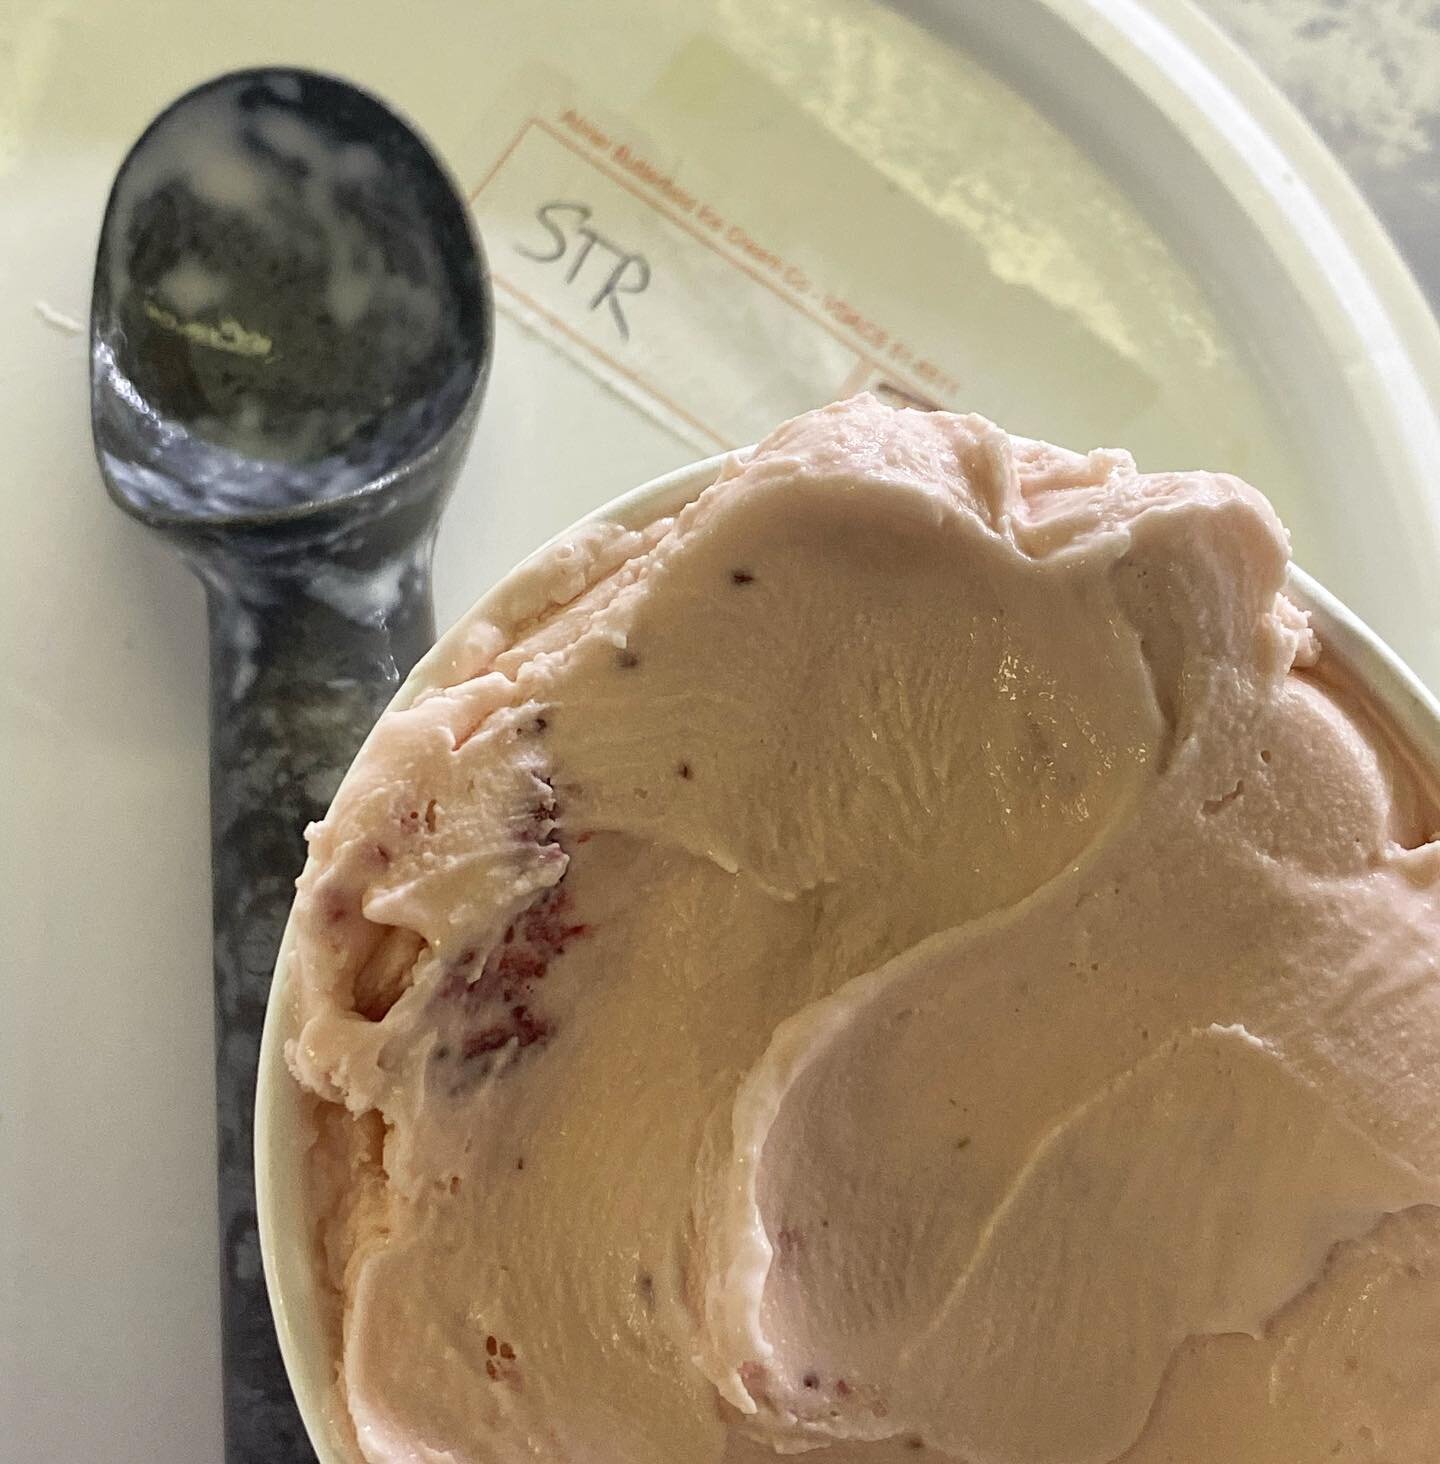 Calling all strawberry fans! This creamy flavor is full of real strawberries. Pick up a pint of your favorite fruit flavors today! 🍓❤️🍦🍨

#fredericksburg #goodeats #icecream #abnerb #hotcoca #fxbg #coffee #carolinestreet #staffordeats #staffordcou